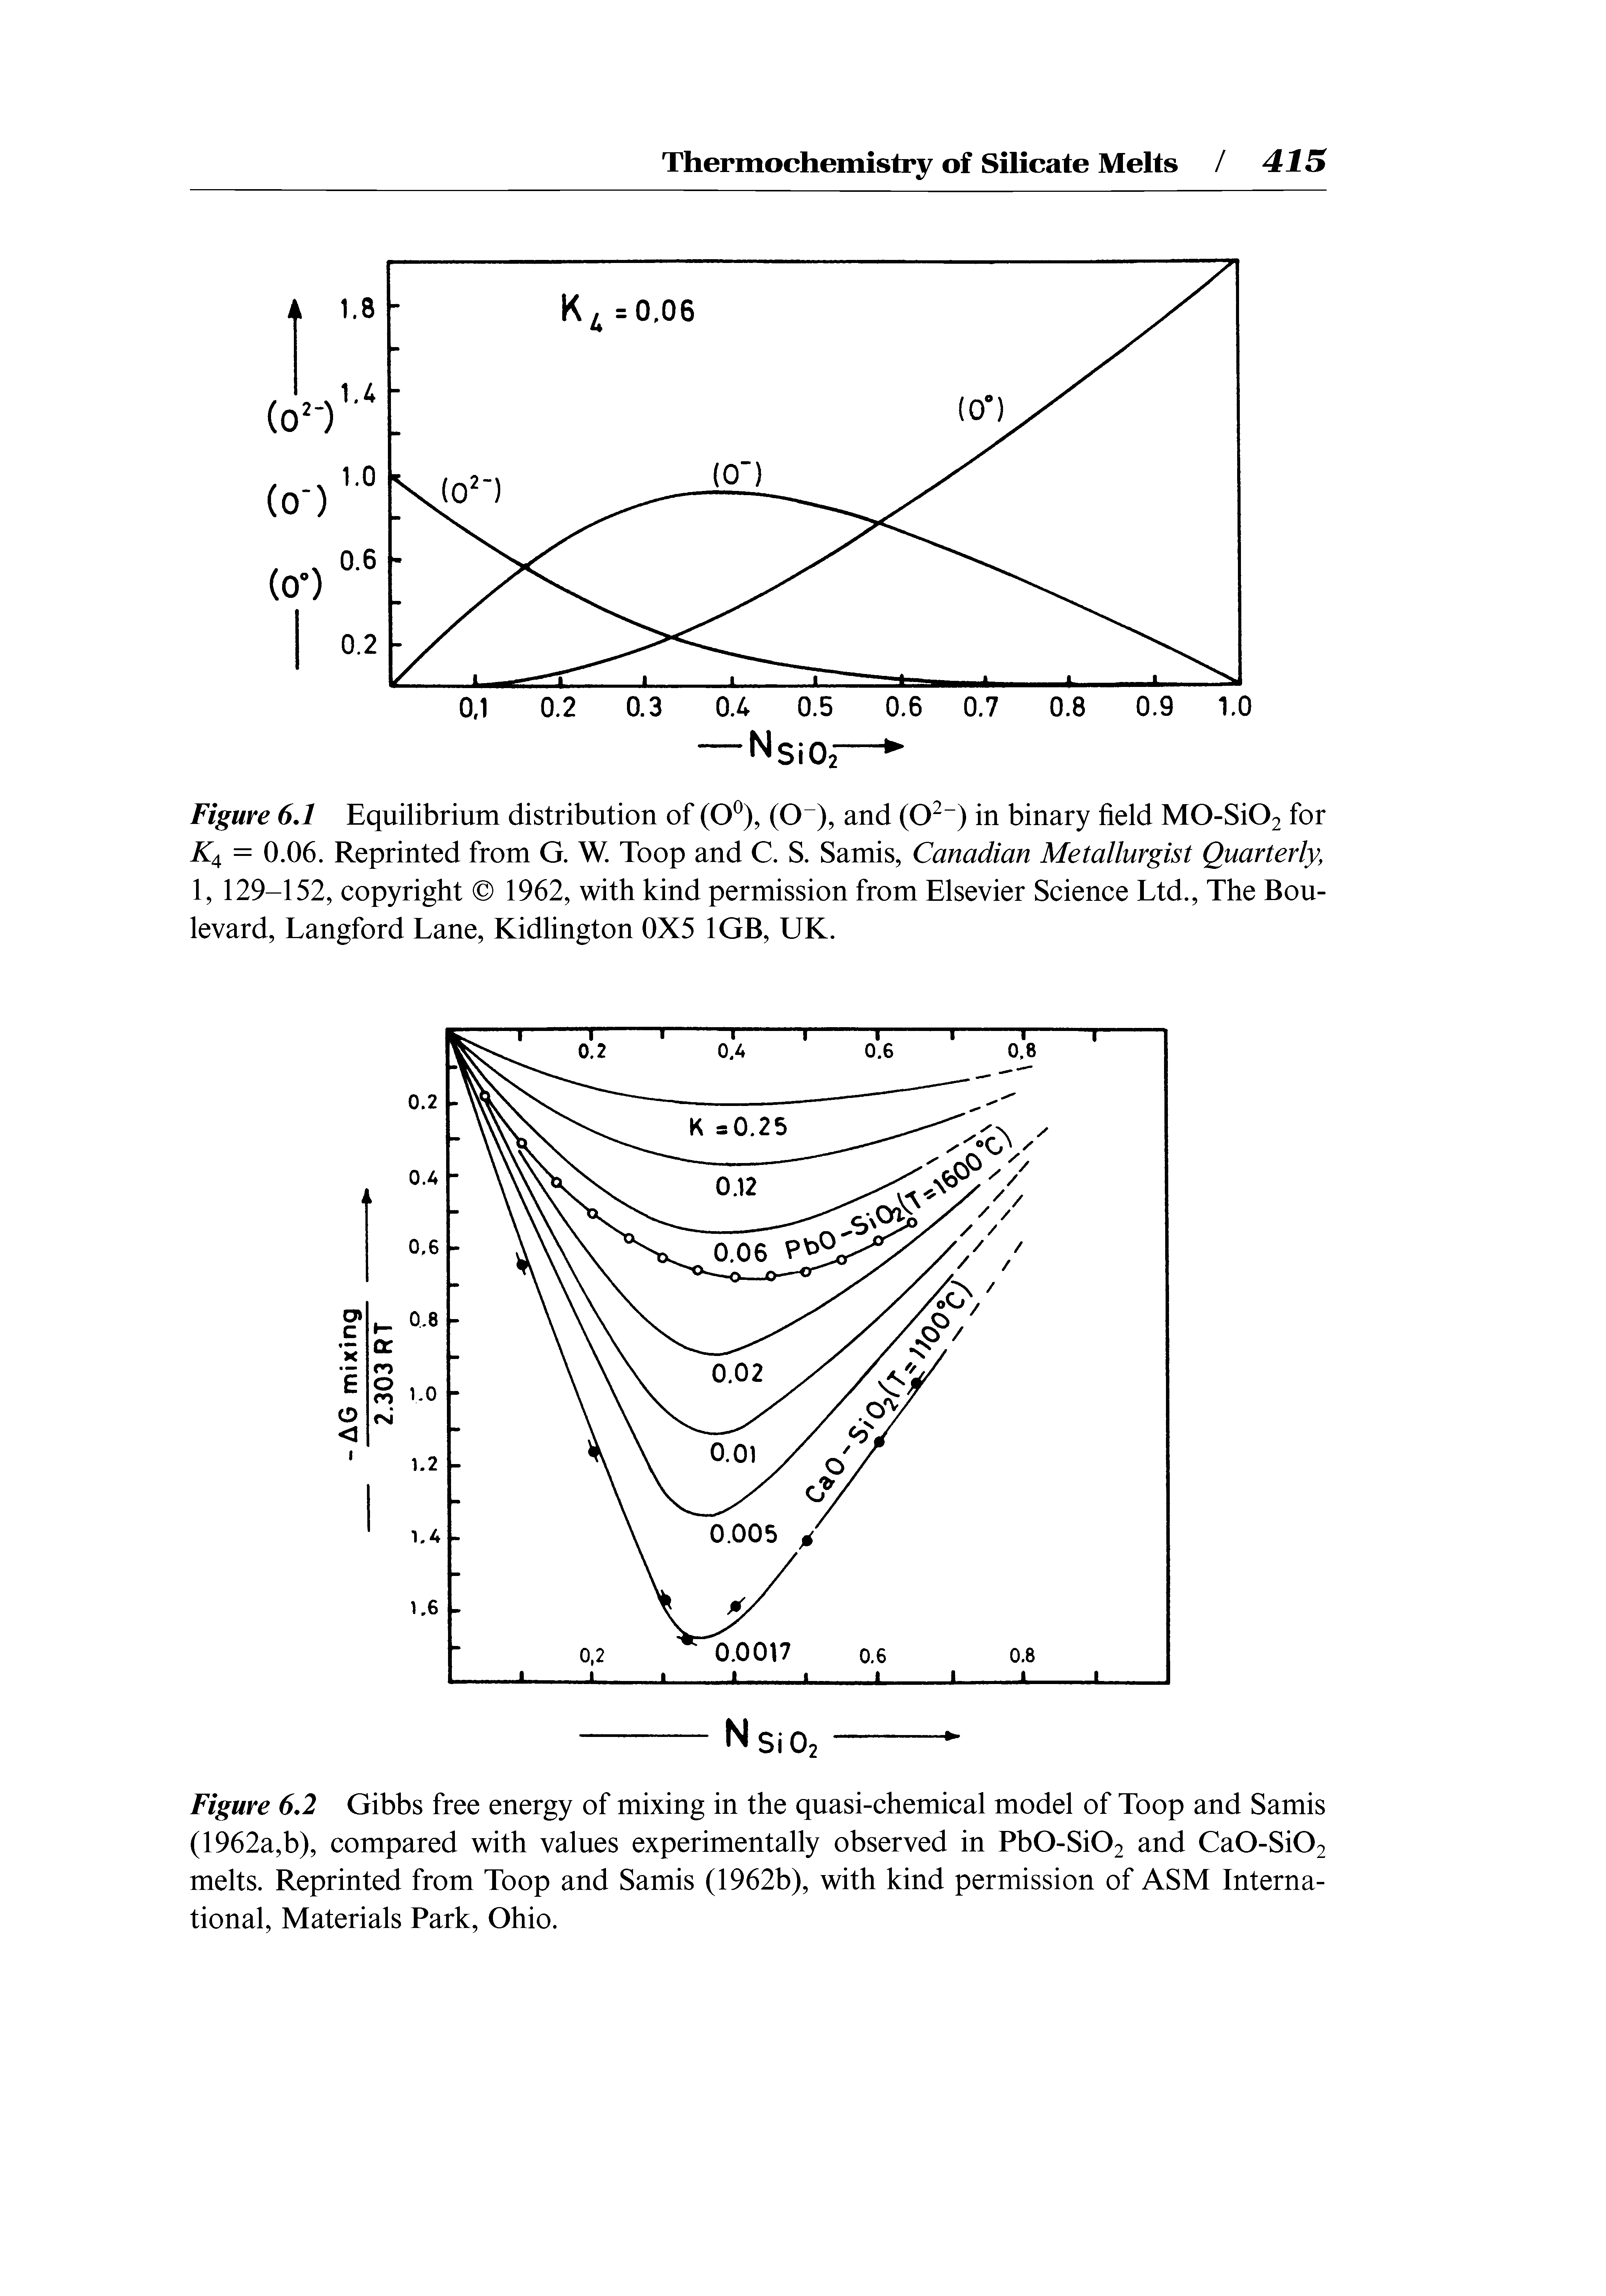 Figure 6.2 Gibbs free energy of mixing in the quasi-chemical model of Toop and Samis (1962a,b), compared with values experimentally observed in Pb0-Si02 and Ca0-Si02 melts. Reprinted from Toop and Samis (1962b), with kind permission of ASM International, Materials Park, Ohio.